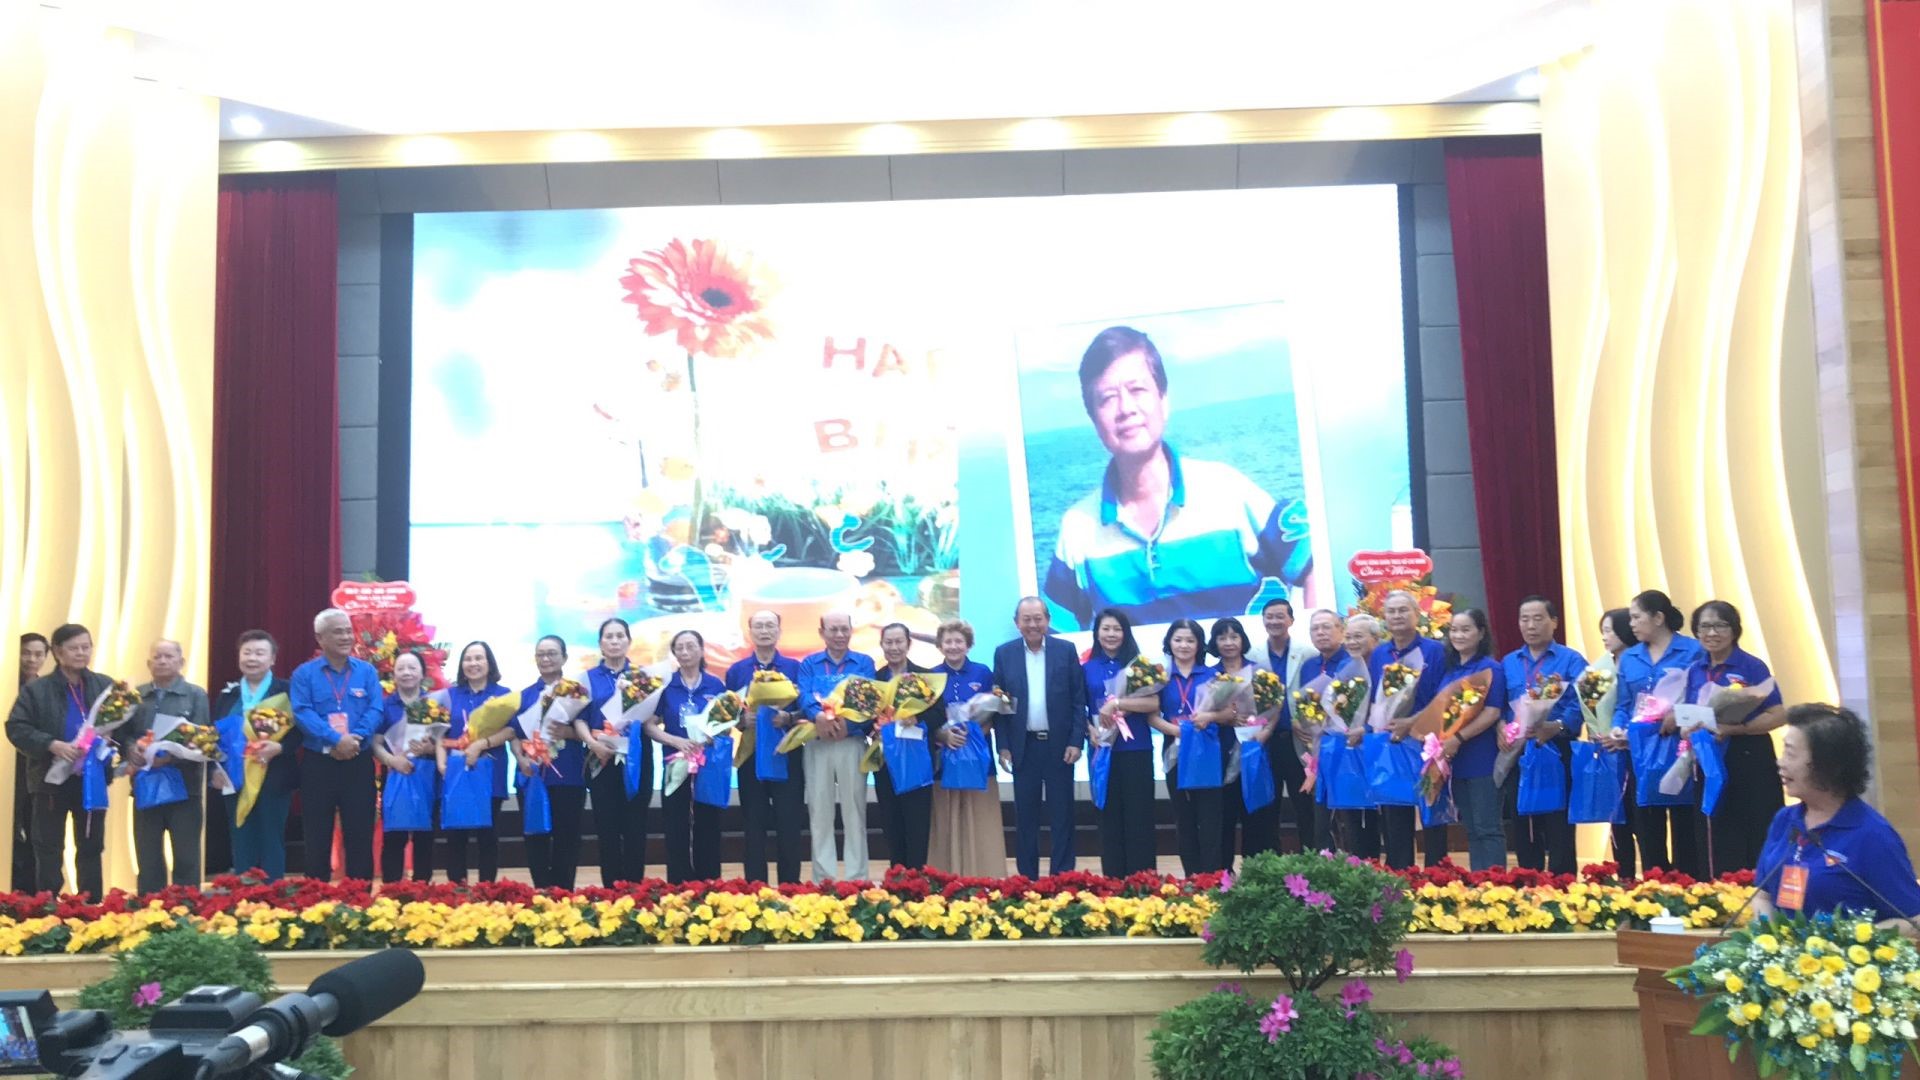 Comrade Truong Hoa Binh presented flowers to honor former Youth Union officials who had many achievements in social work and the activities of the Southern Vietnam Youth Union Former Liaison Committee.